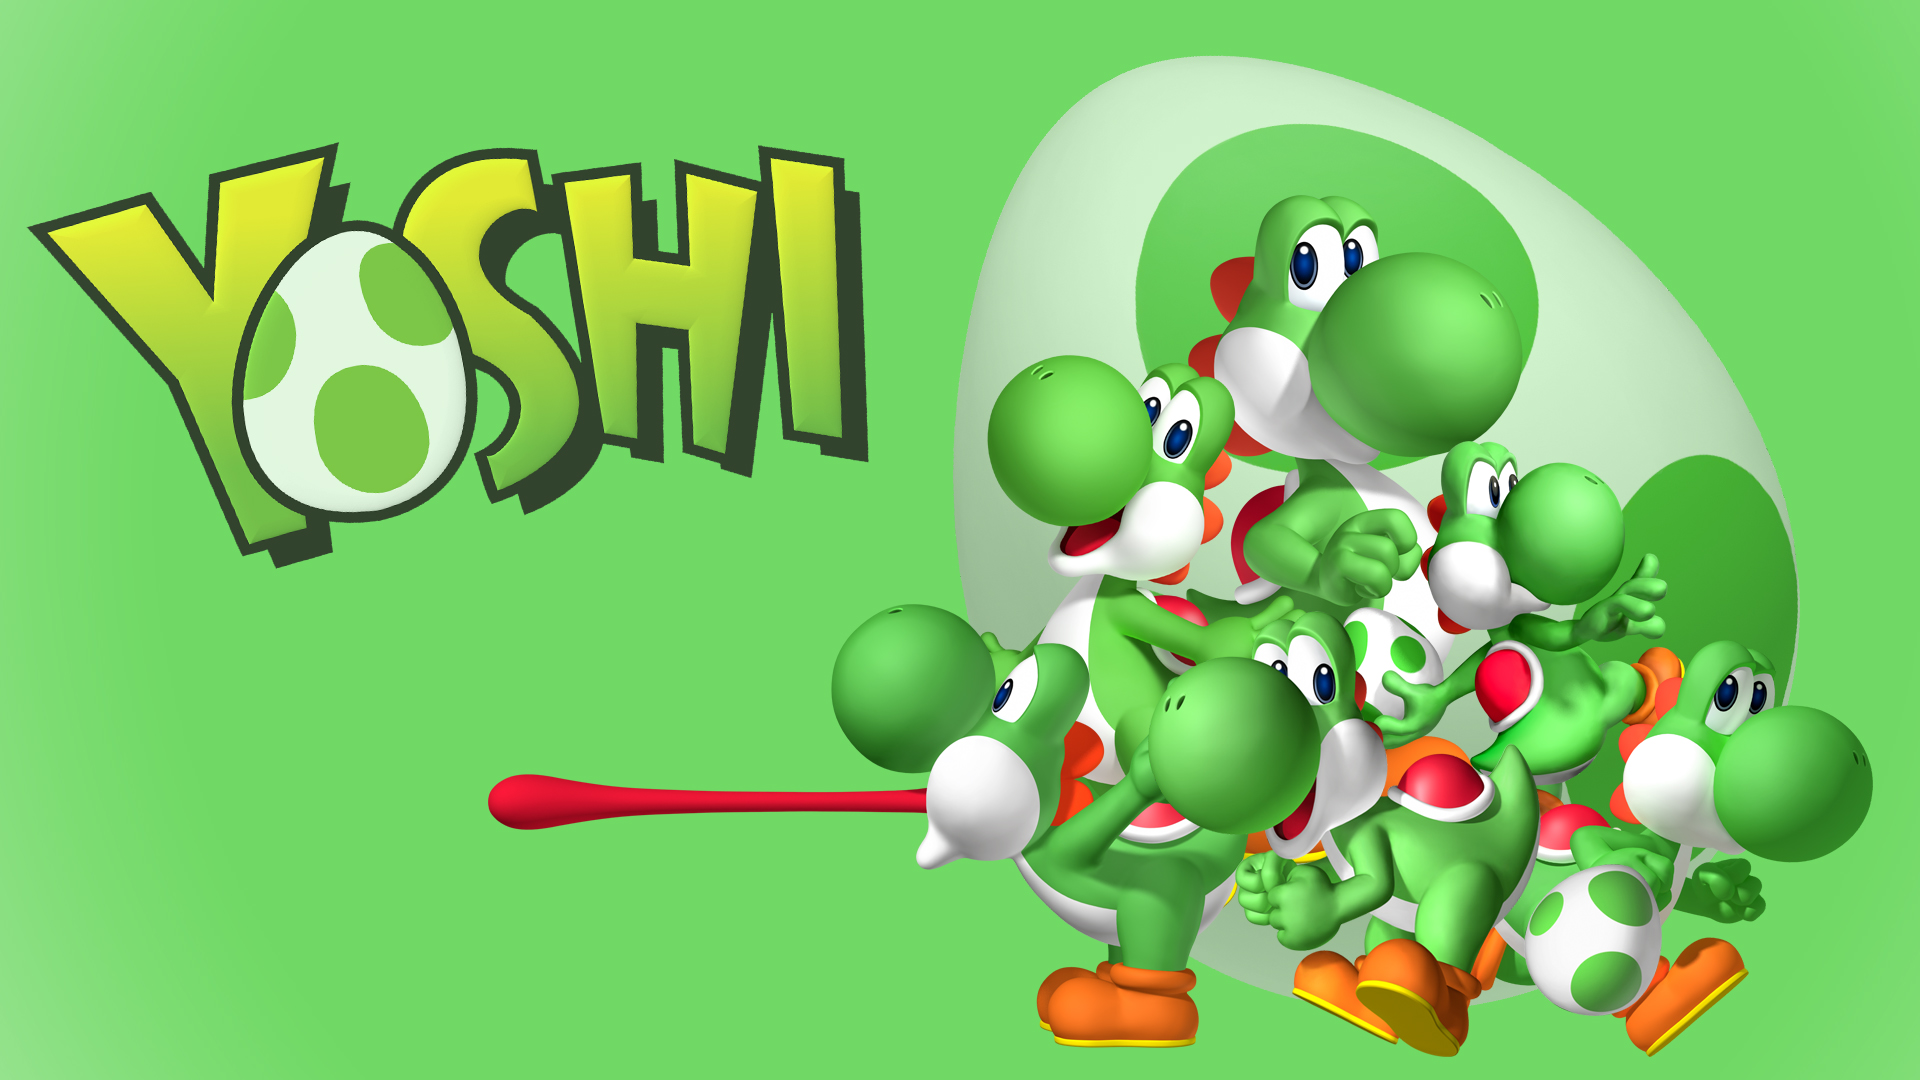 When it comes to Yoshis, the more the merrier!